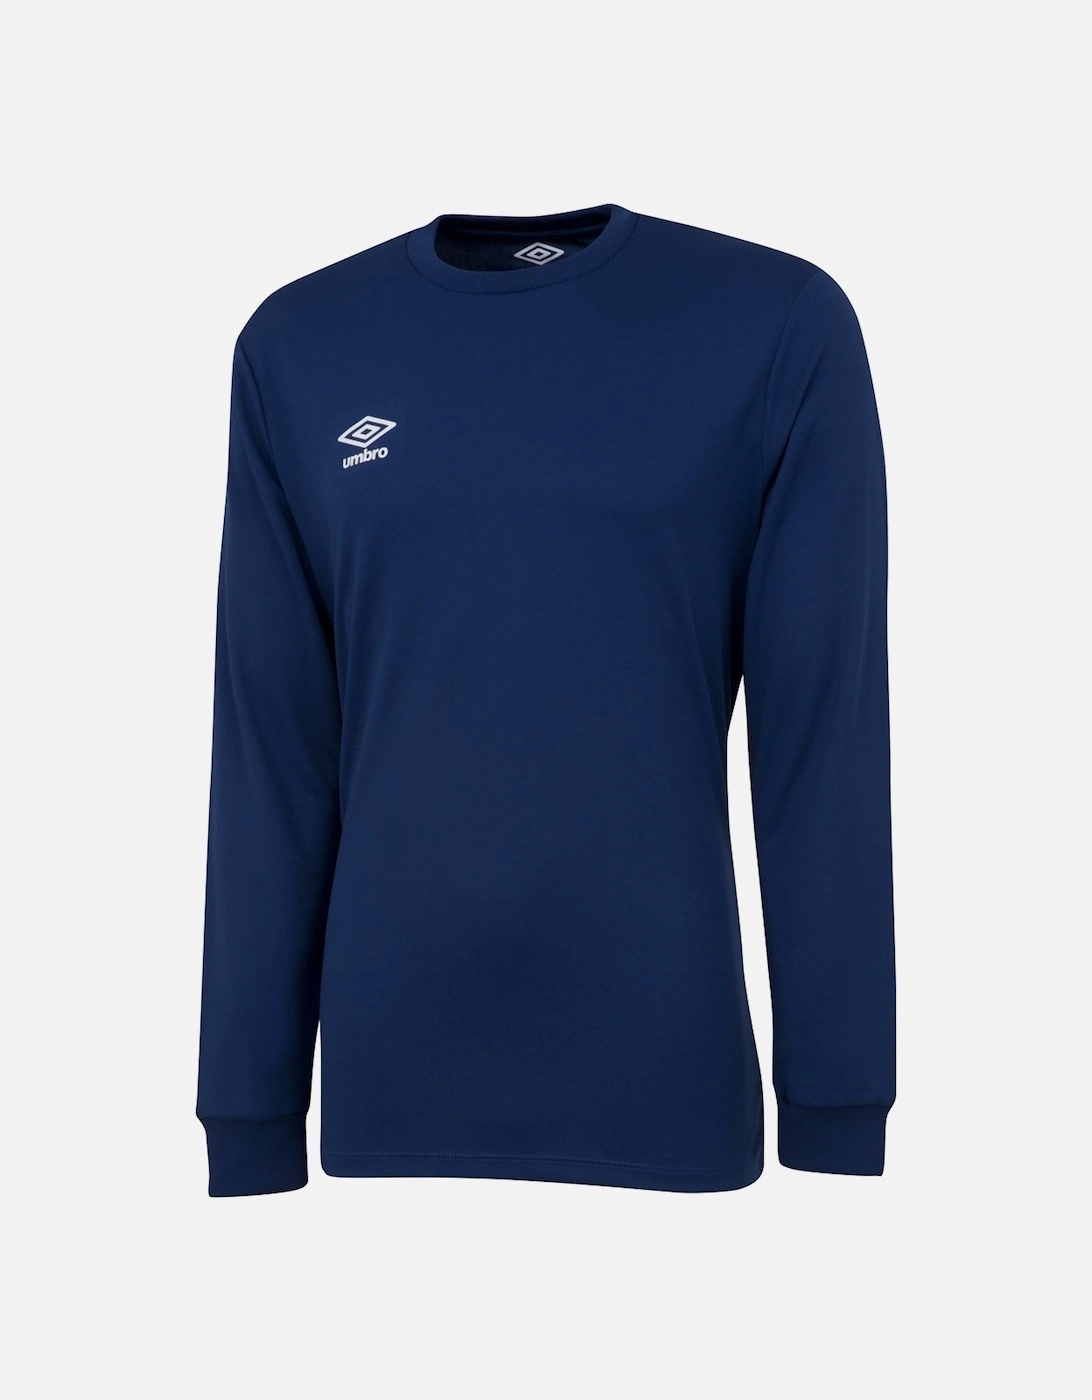 Mens Club Long-Sleeved Jersey